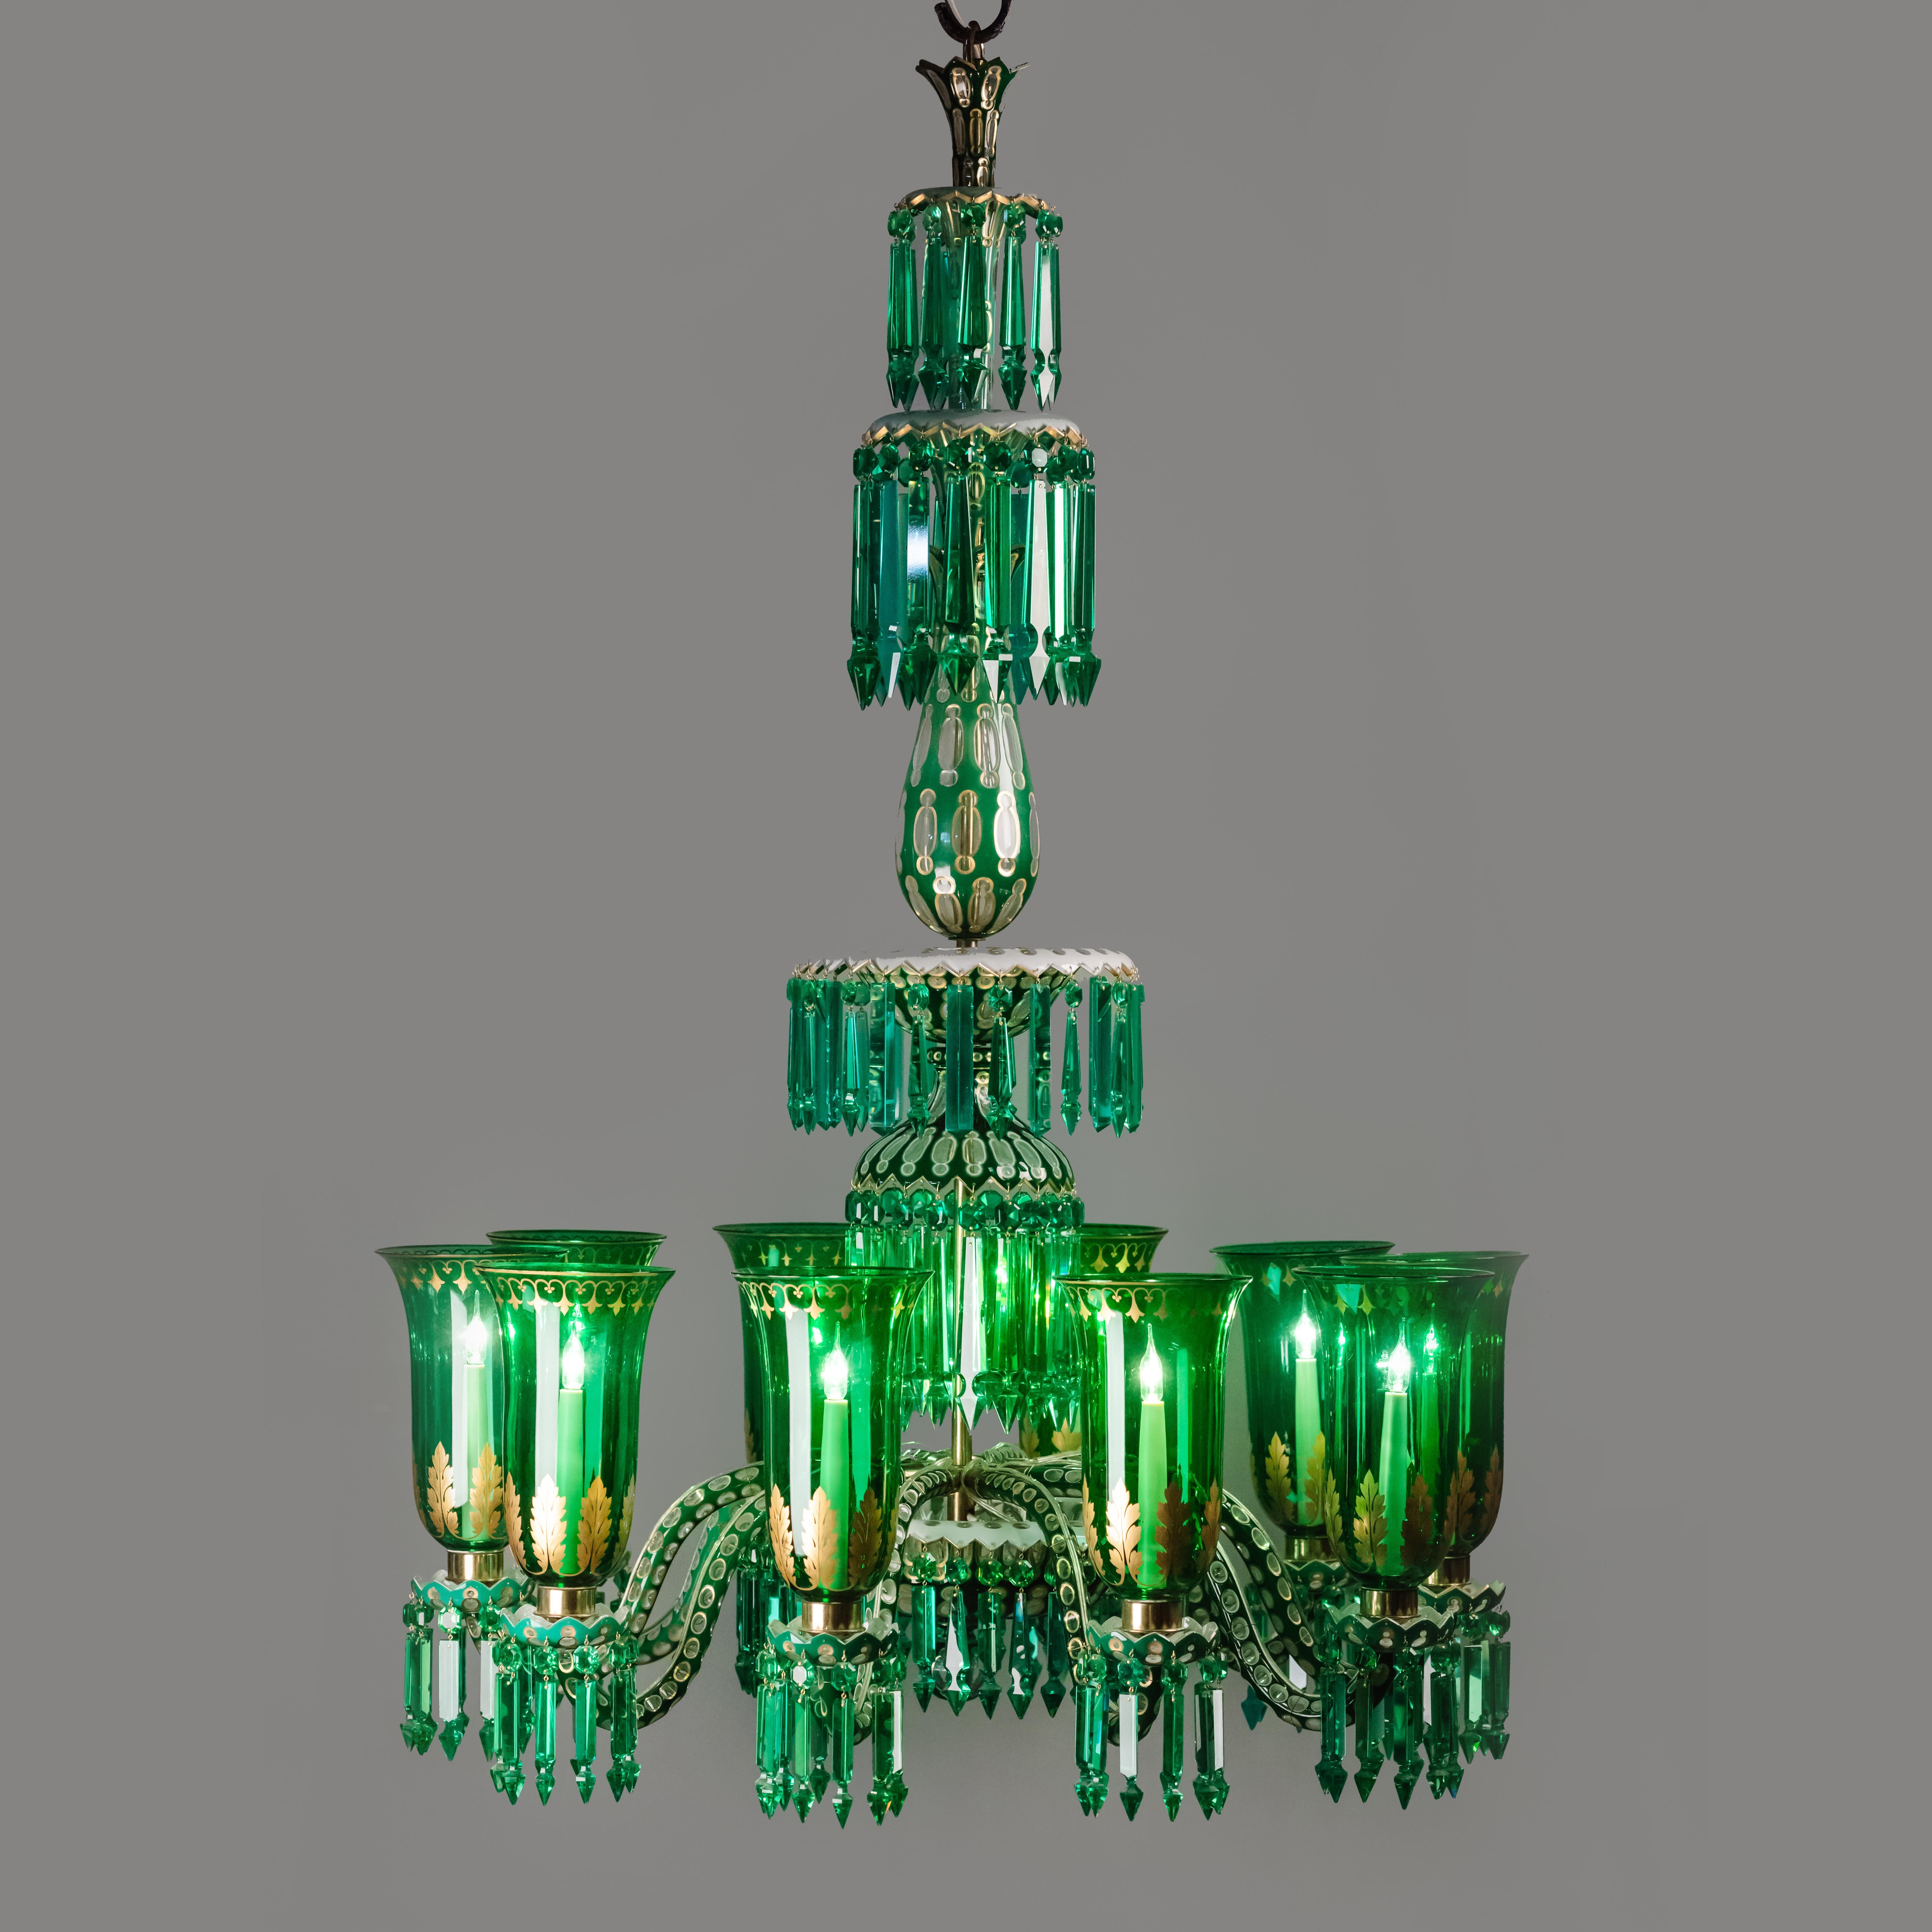 A fine and ornate enameled overlay ten-light emerald green chandelier by F. & C. Osler in clear, white and emerald green glass with gilt enrichments.

The vase form corona is hung with ‘plain Alberts’ and ‘rule’ drops above two further tiers of